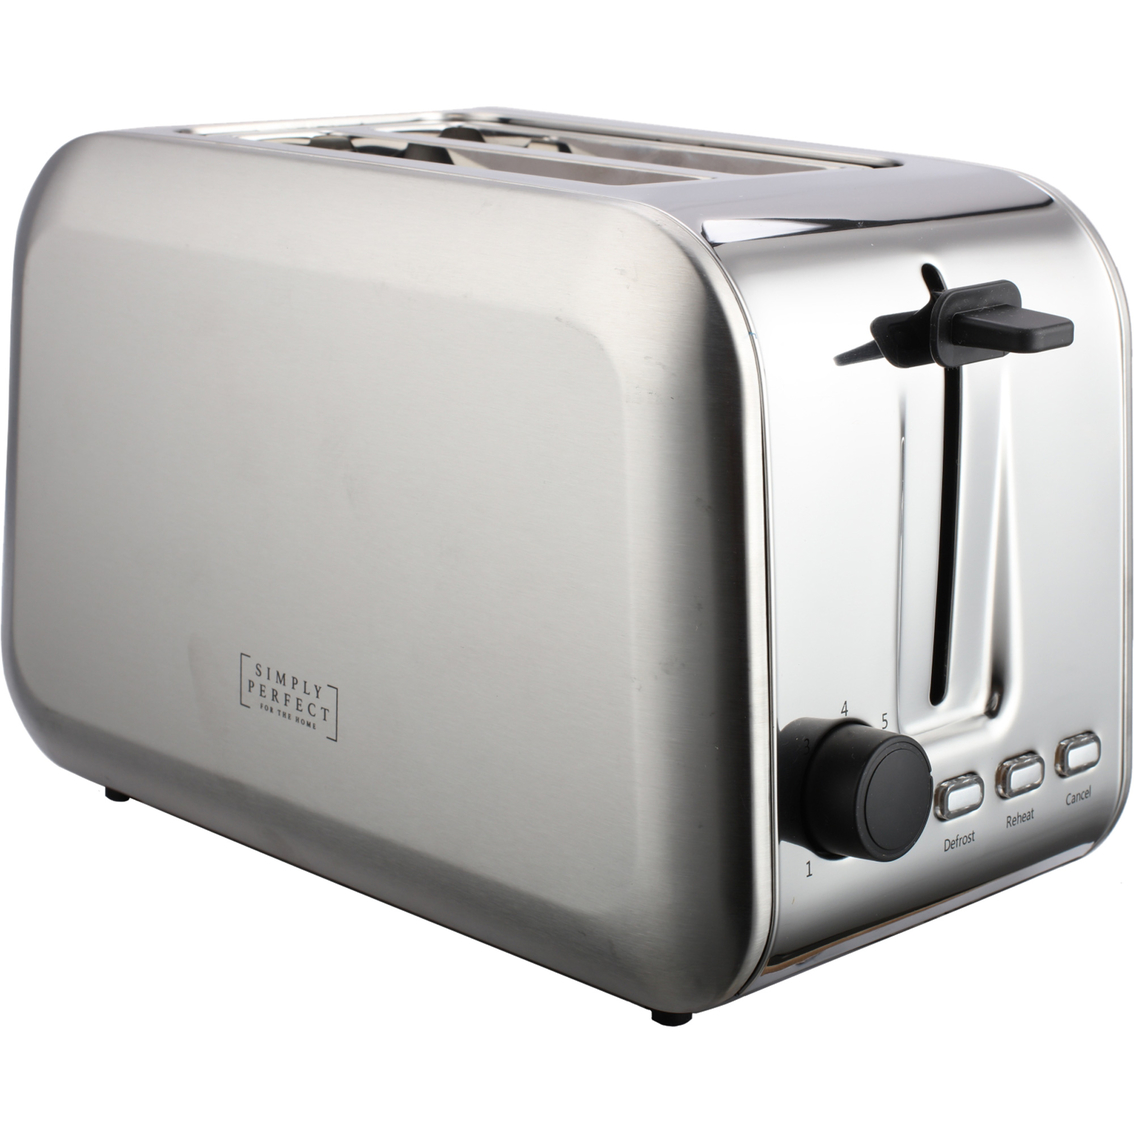 Simply Perfect 2 Slice Stainless Steel Toaster